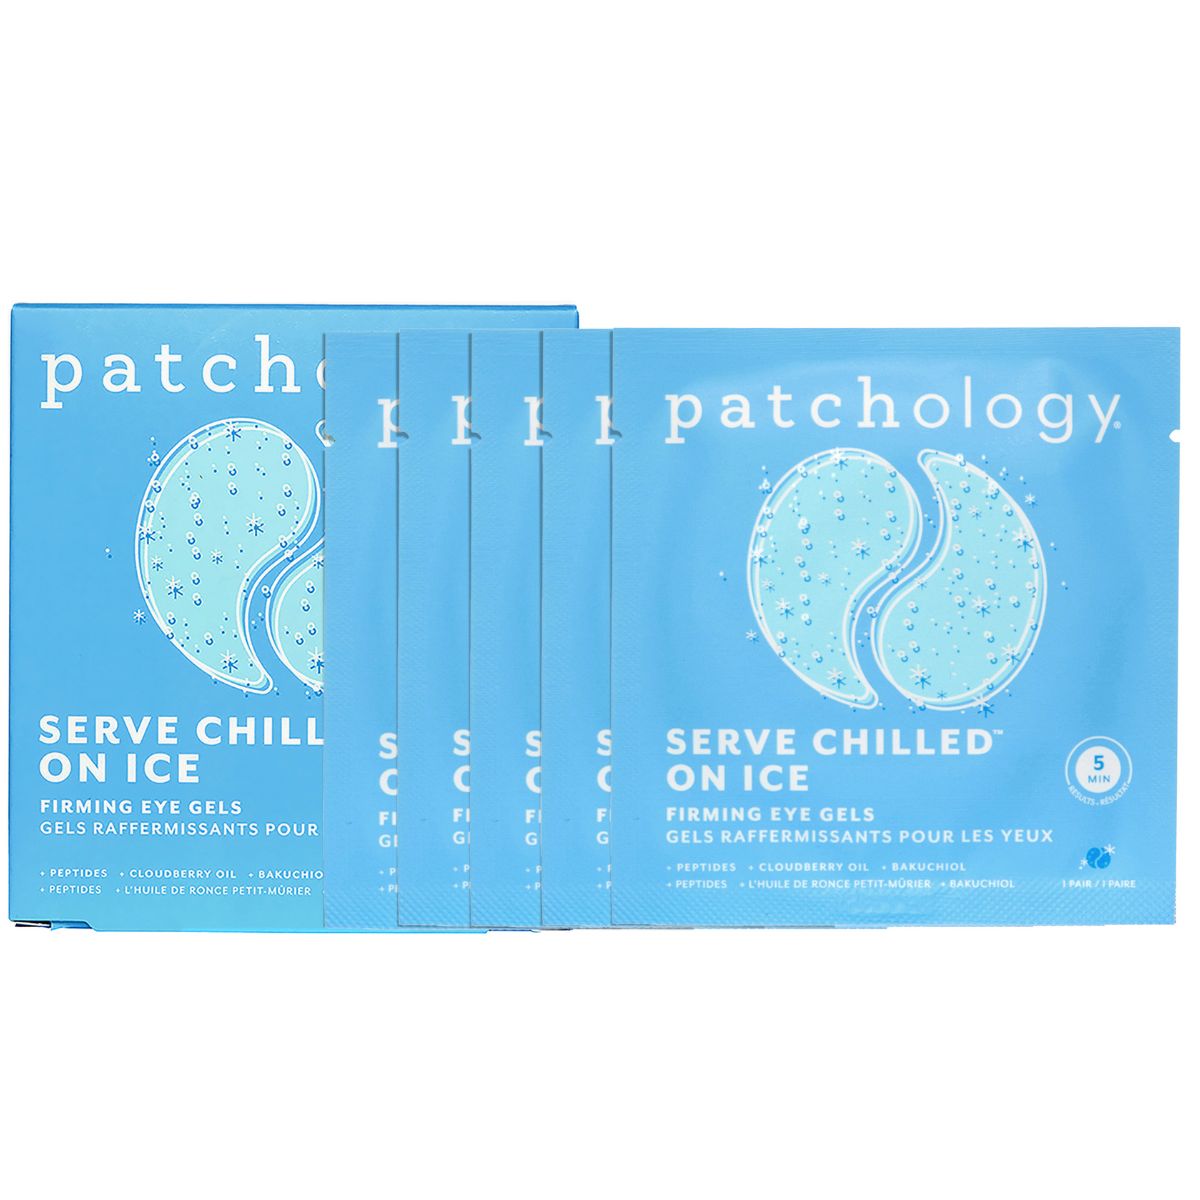 Patchology Serve Chilled On Ice Firming Eye Gel Mask